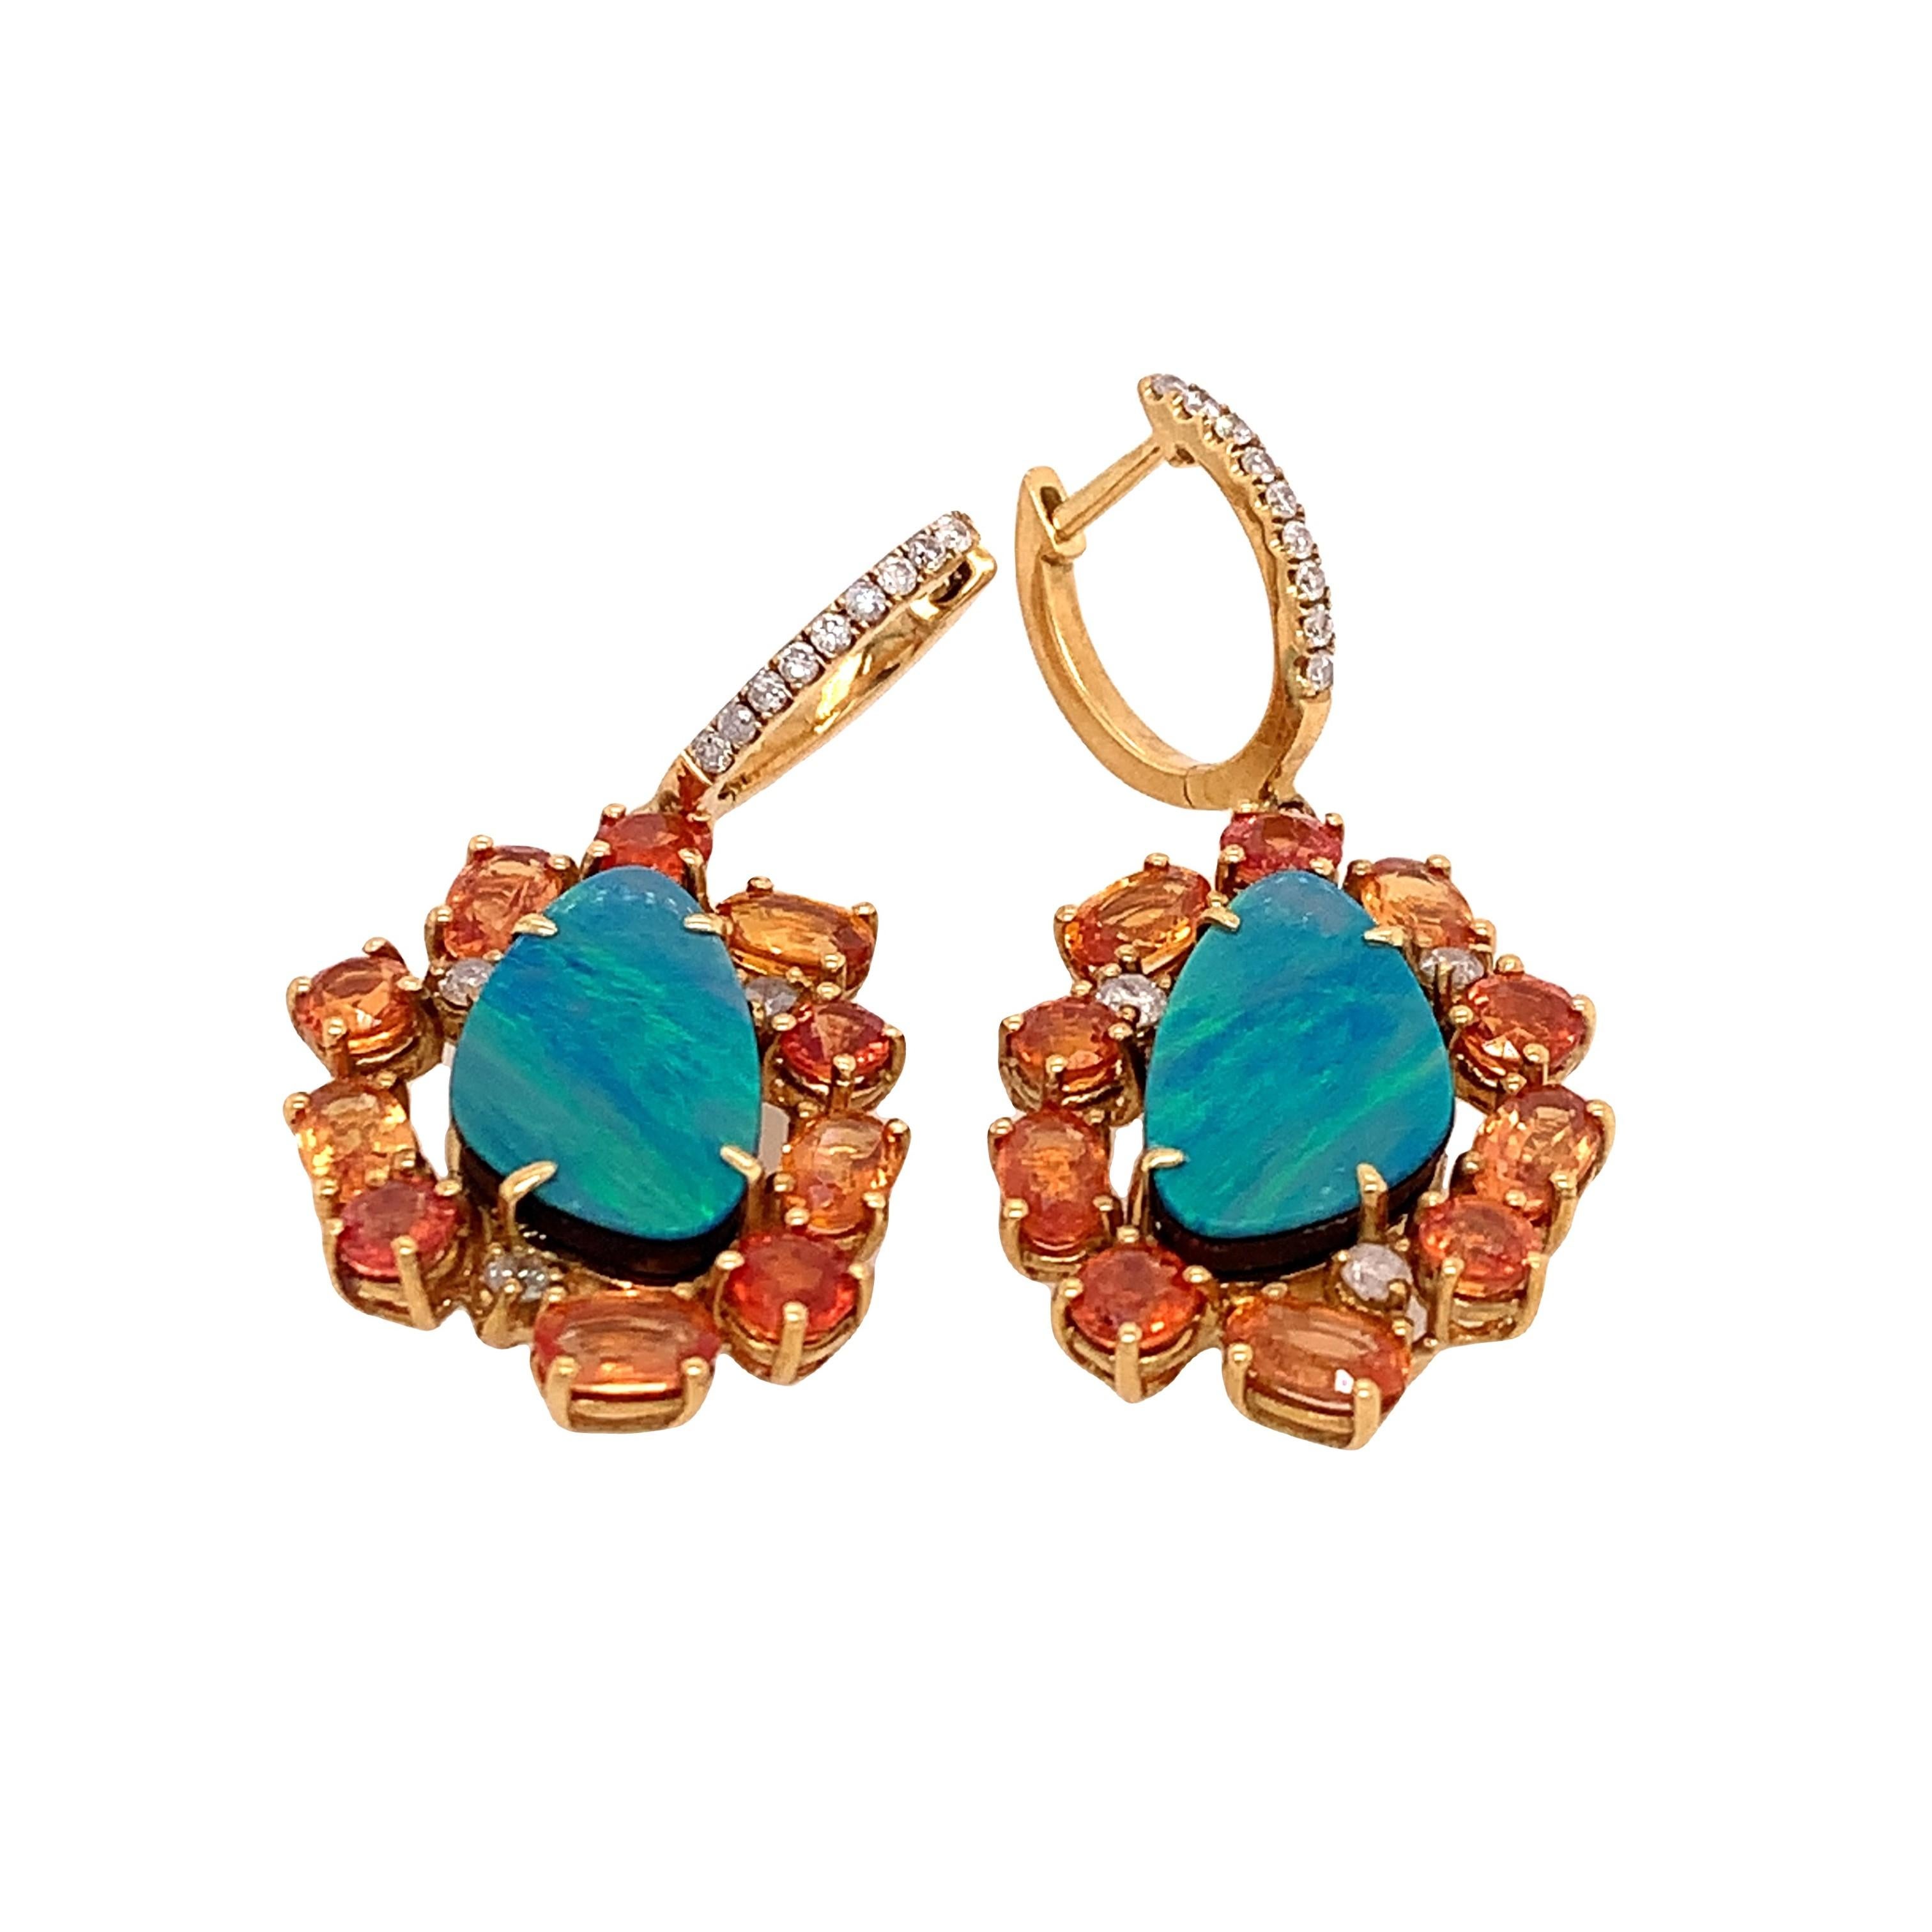 Lillipad Collection

You can see perfect color scheme of Blue Opal, Orange Sapphires and diamonds in this earrings. This Dangle earrings set in 18k yellow gold and perfect match for summer. 

Opal: 4.93ct total weight
Orange Sapphire: 5.23ct total